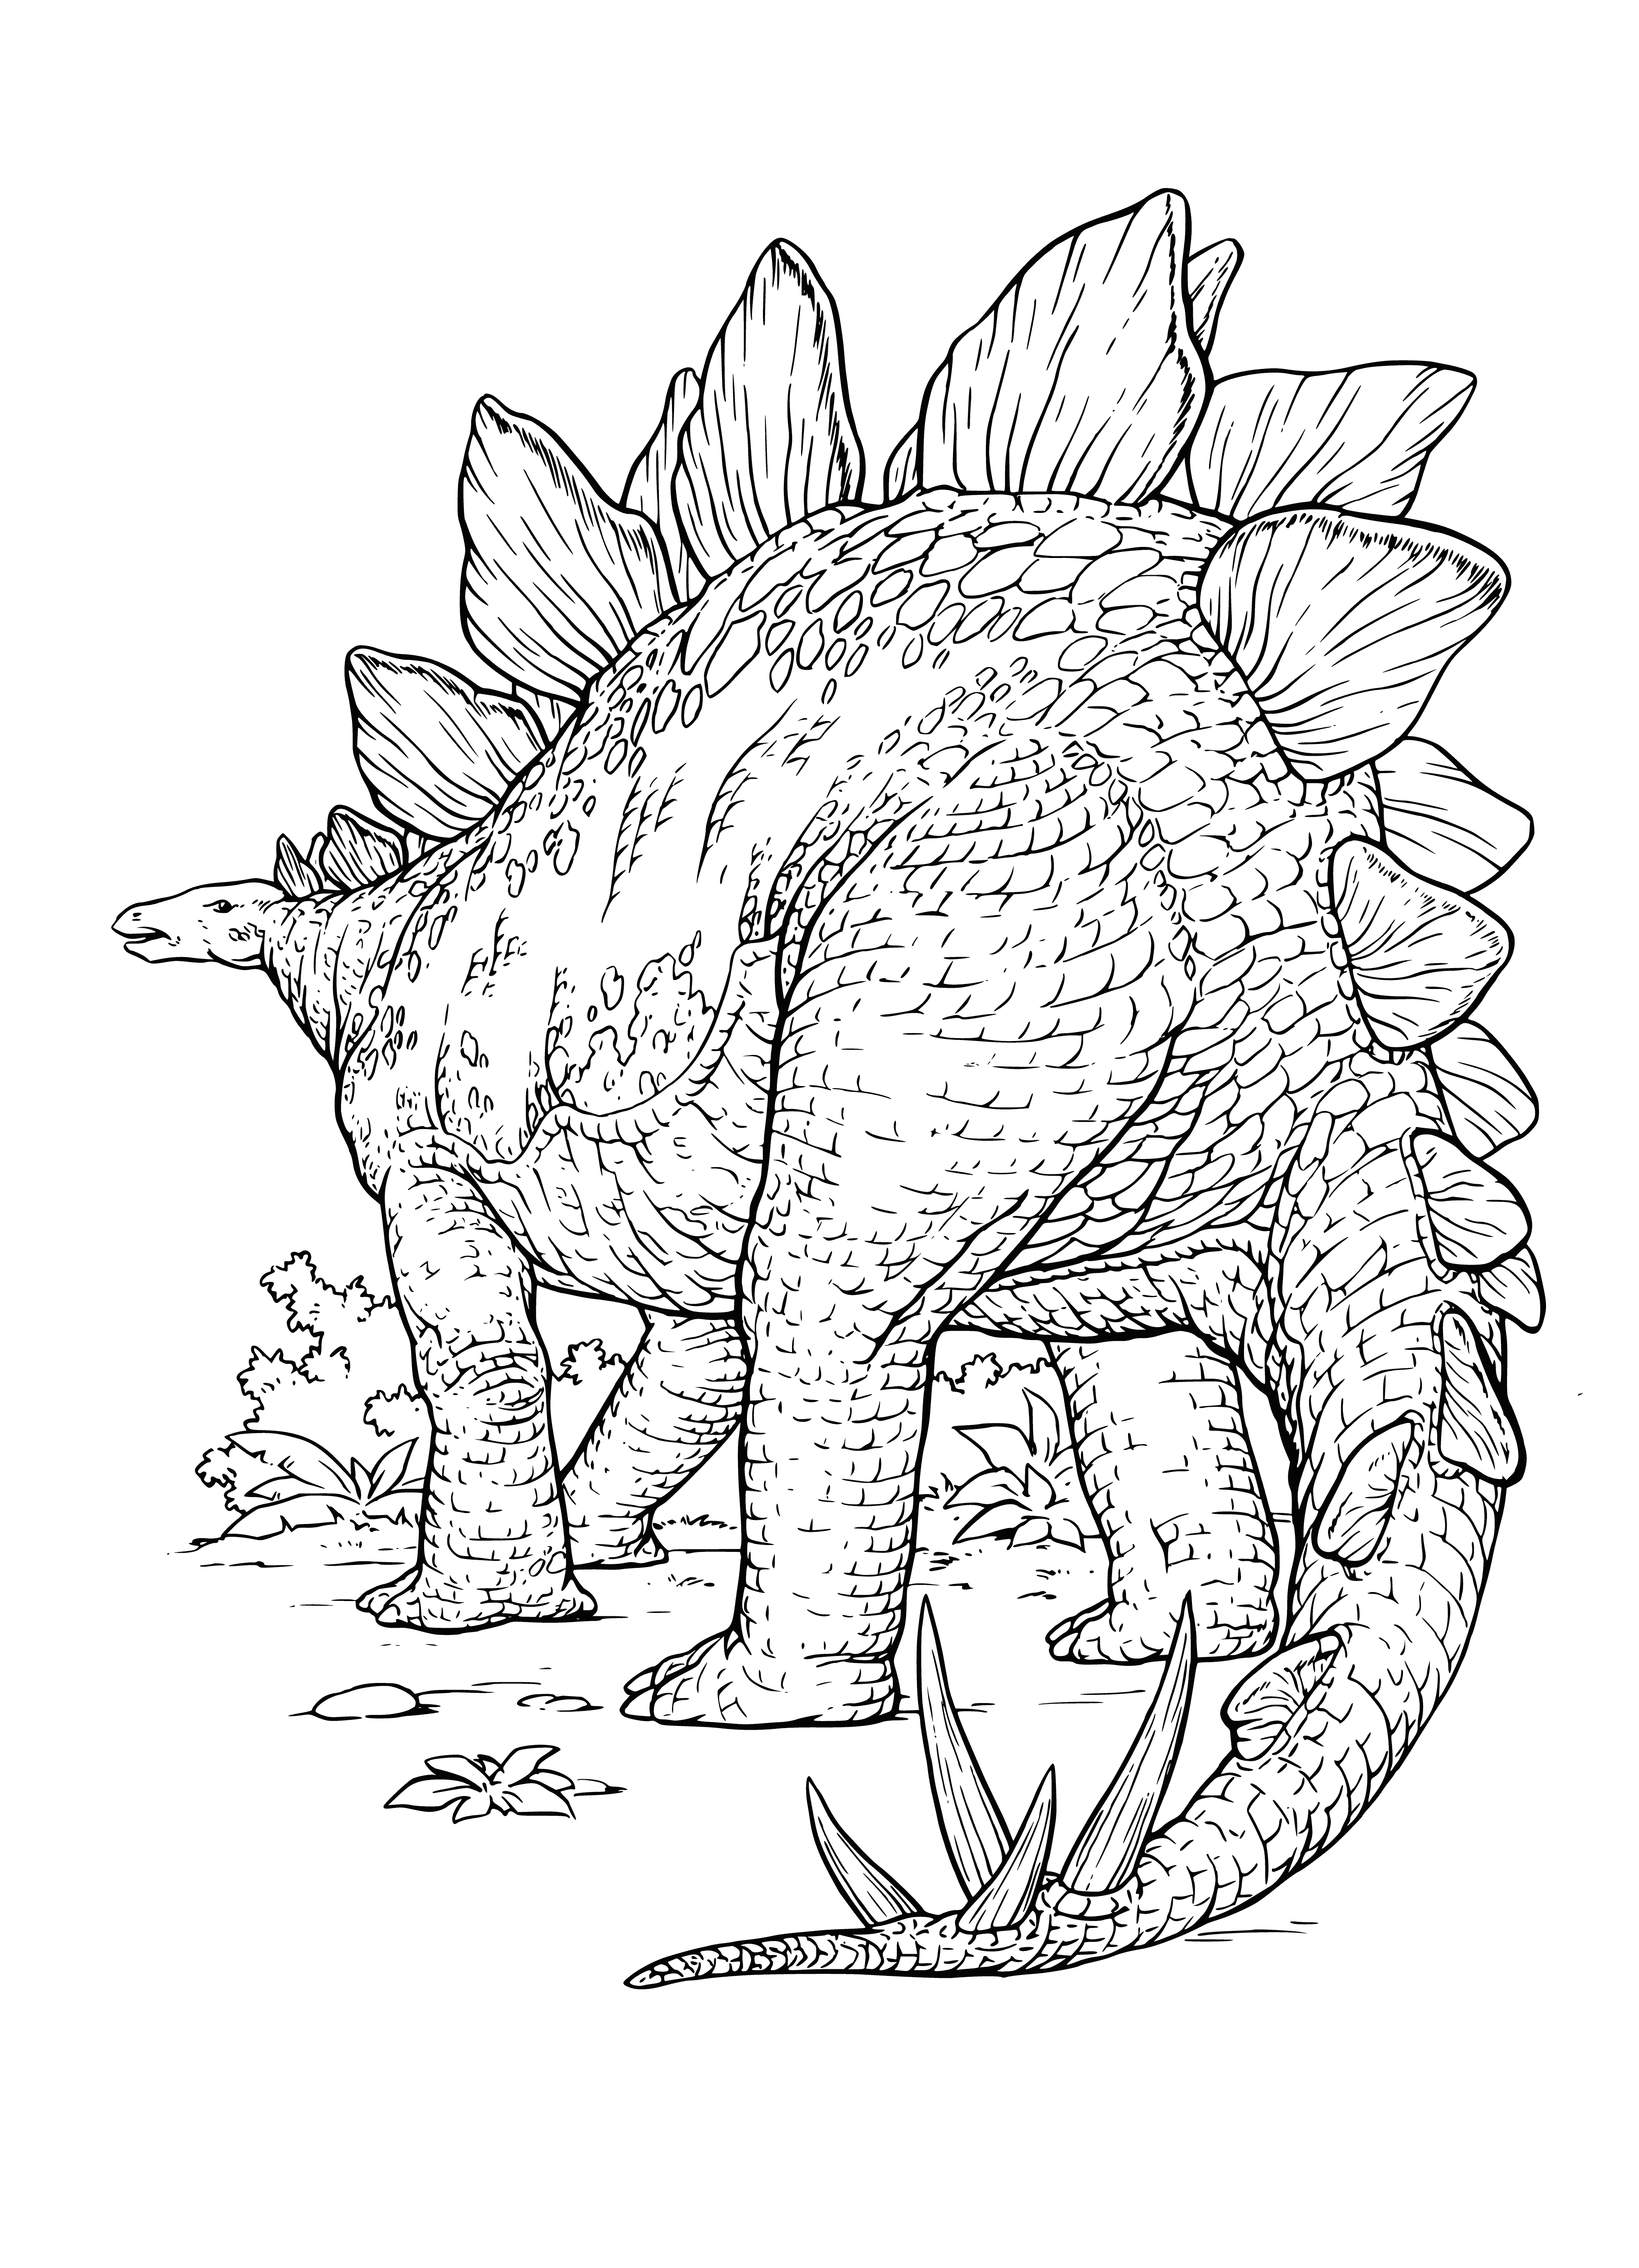 coloring page: An egg is surrounded by colorful dinosaurs trying to reach it, all packed together.